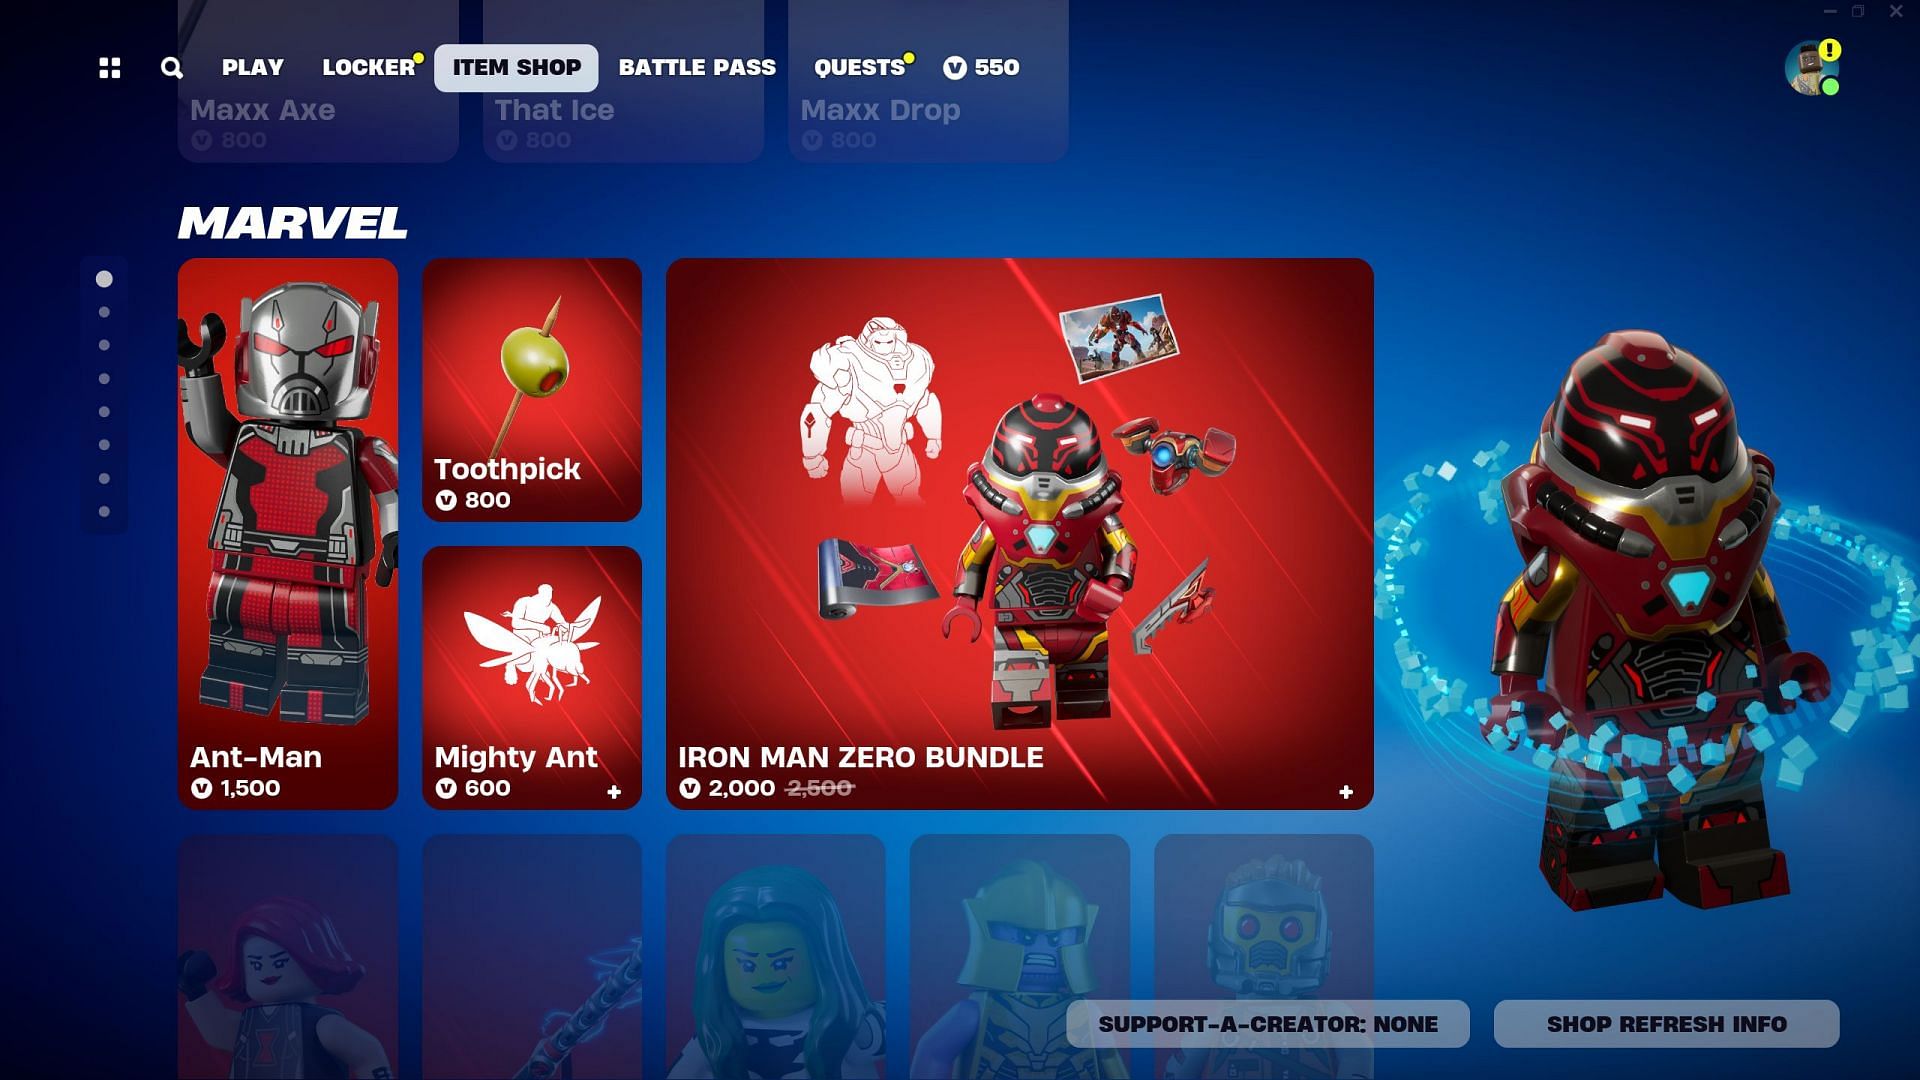 Iron Man Zero Skin is currently listed in the Item Shop (Image via Epic Games/Fortnite)